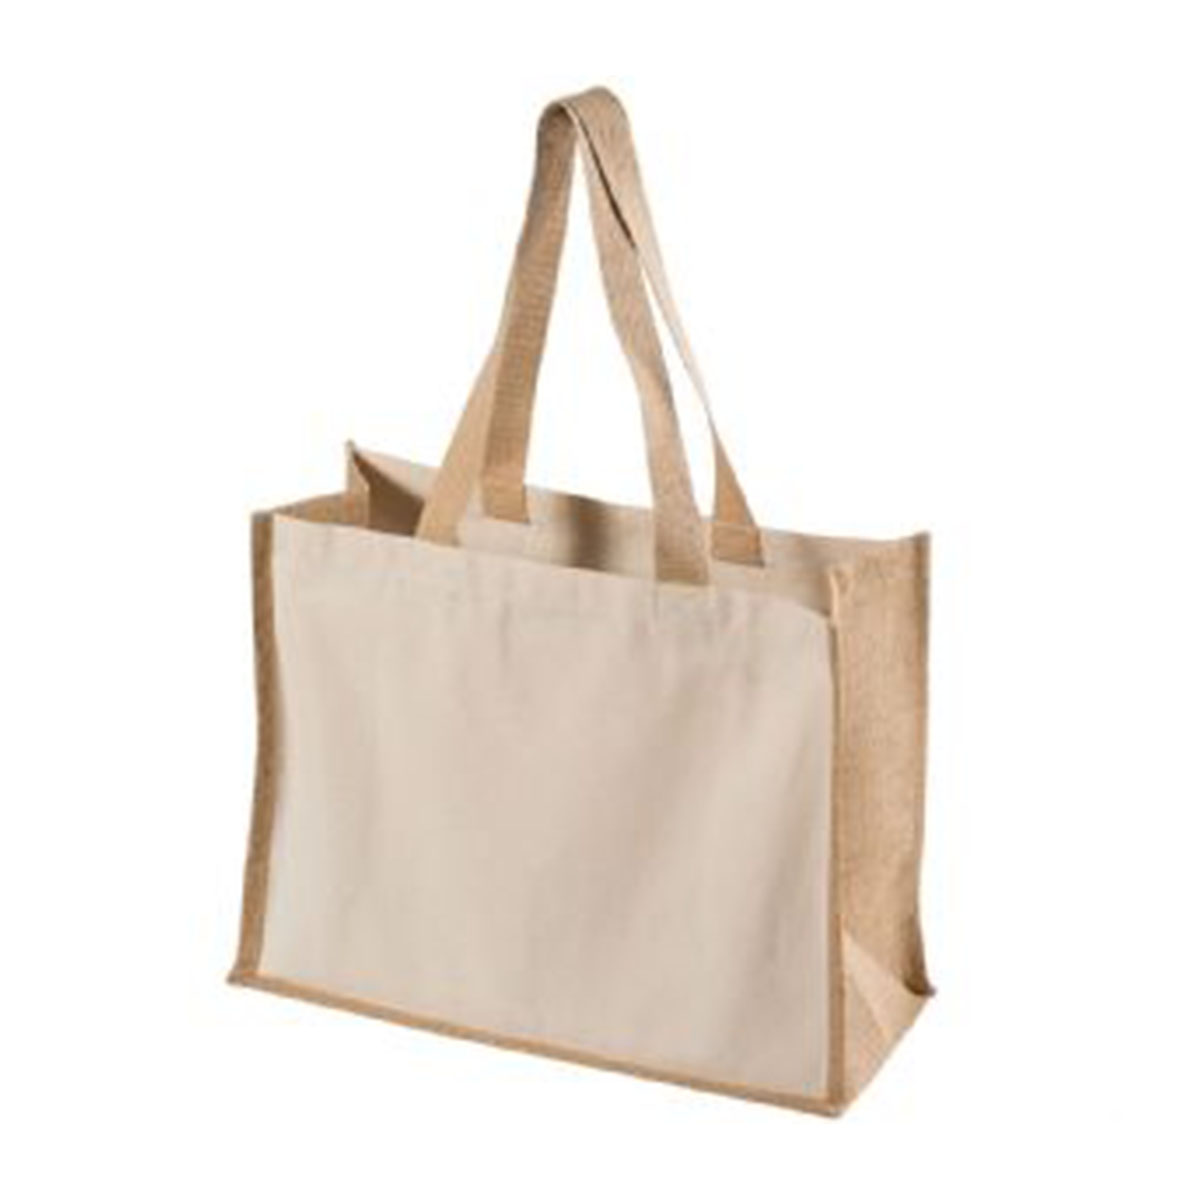 Functional Tote Bag | Natural | Branded Cotton Canvas Totes